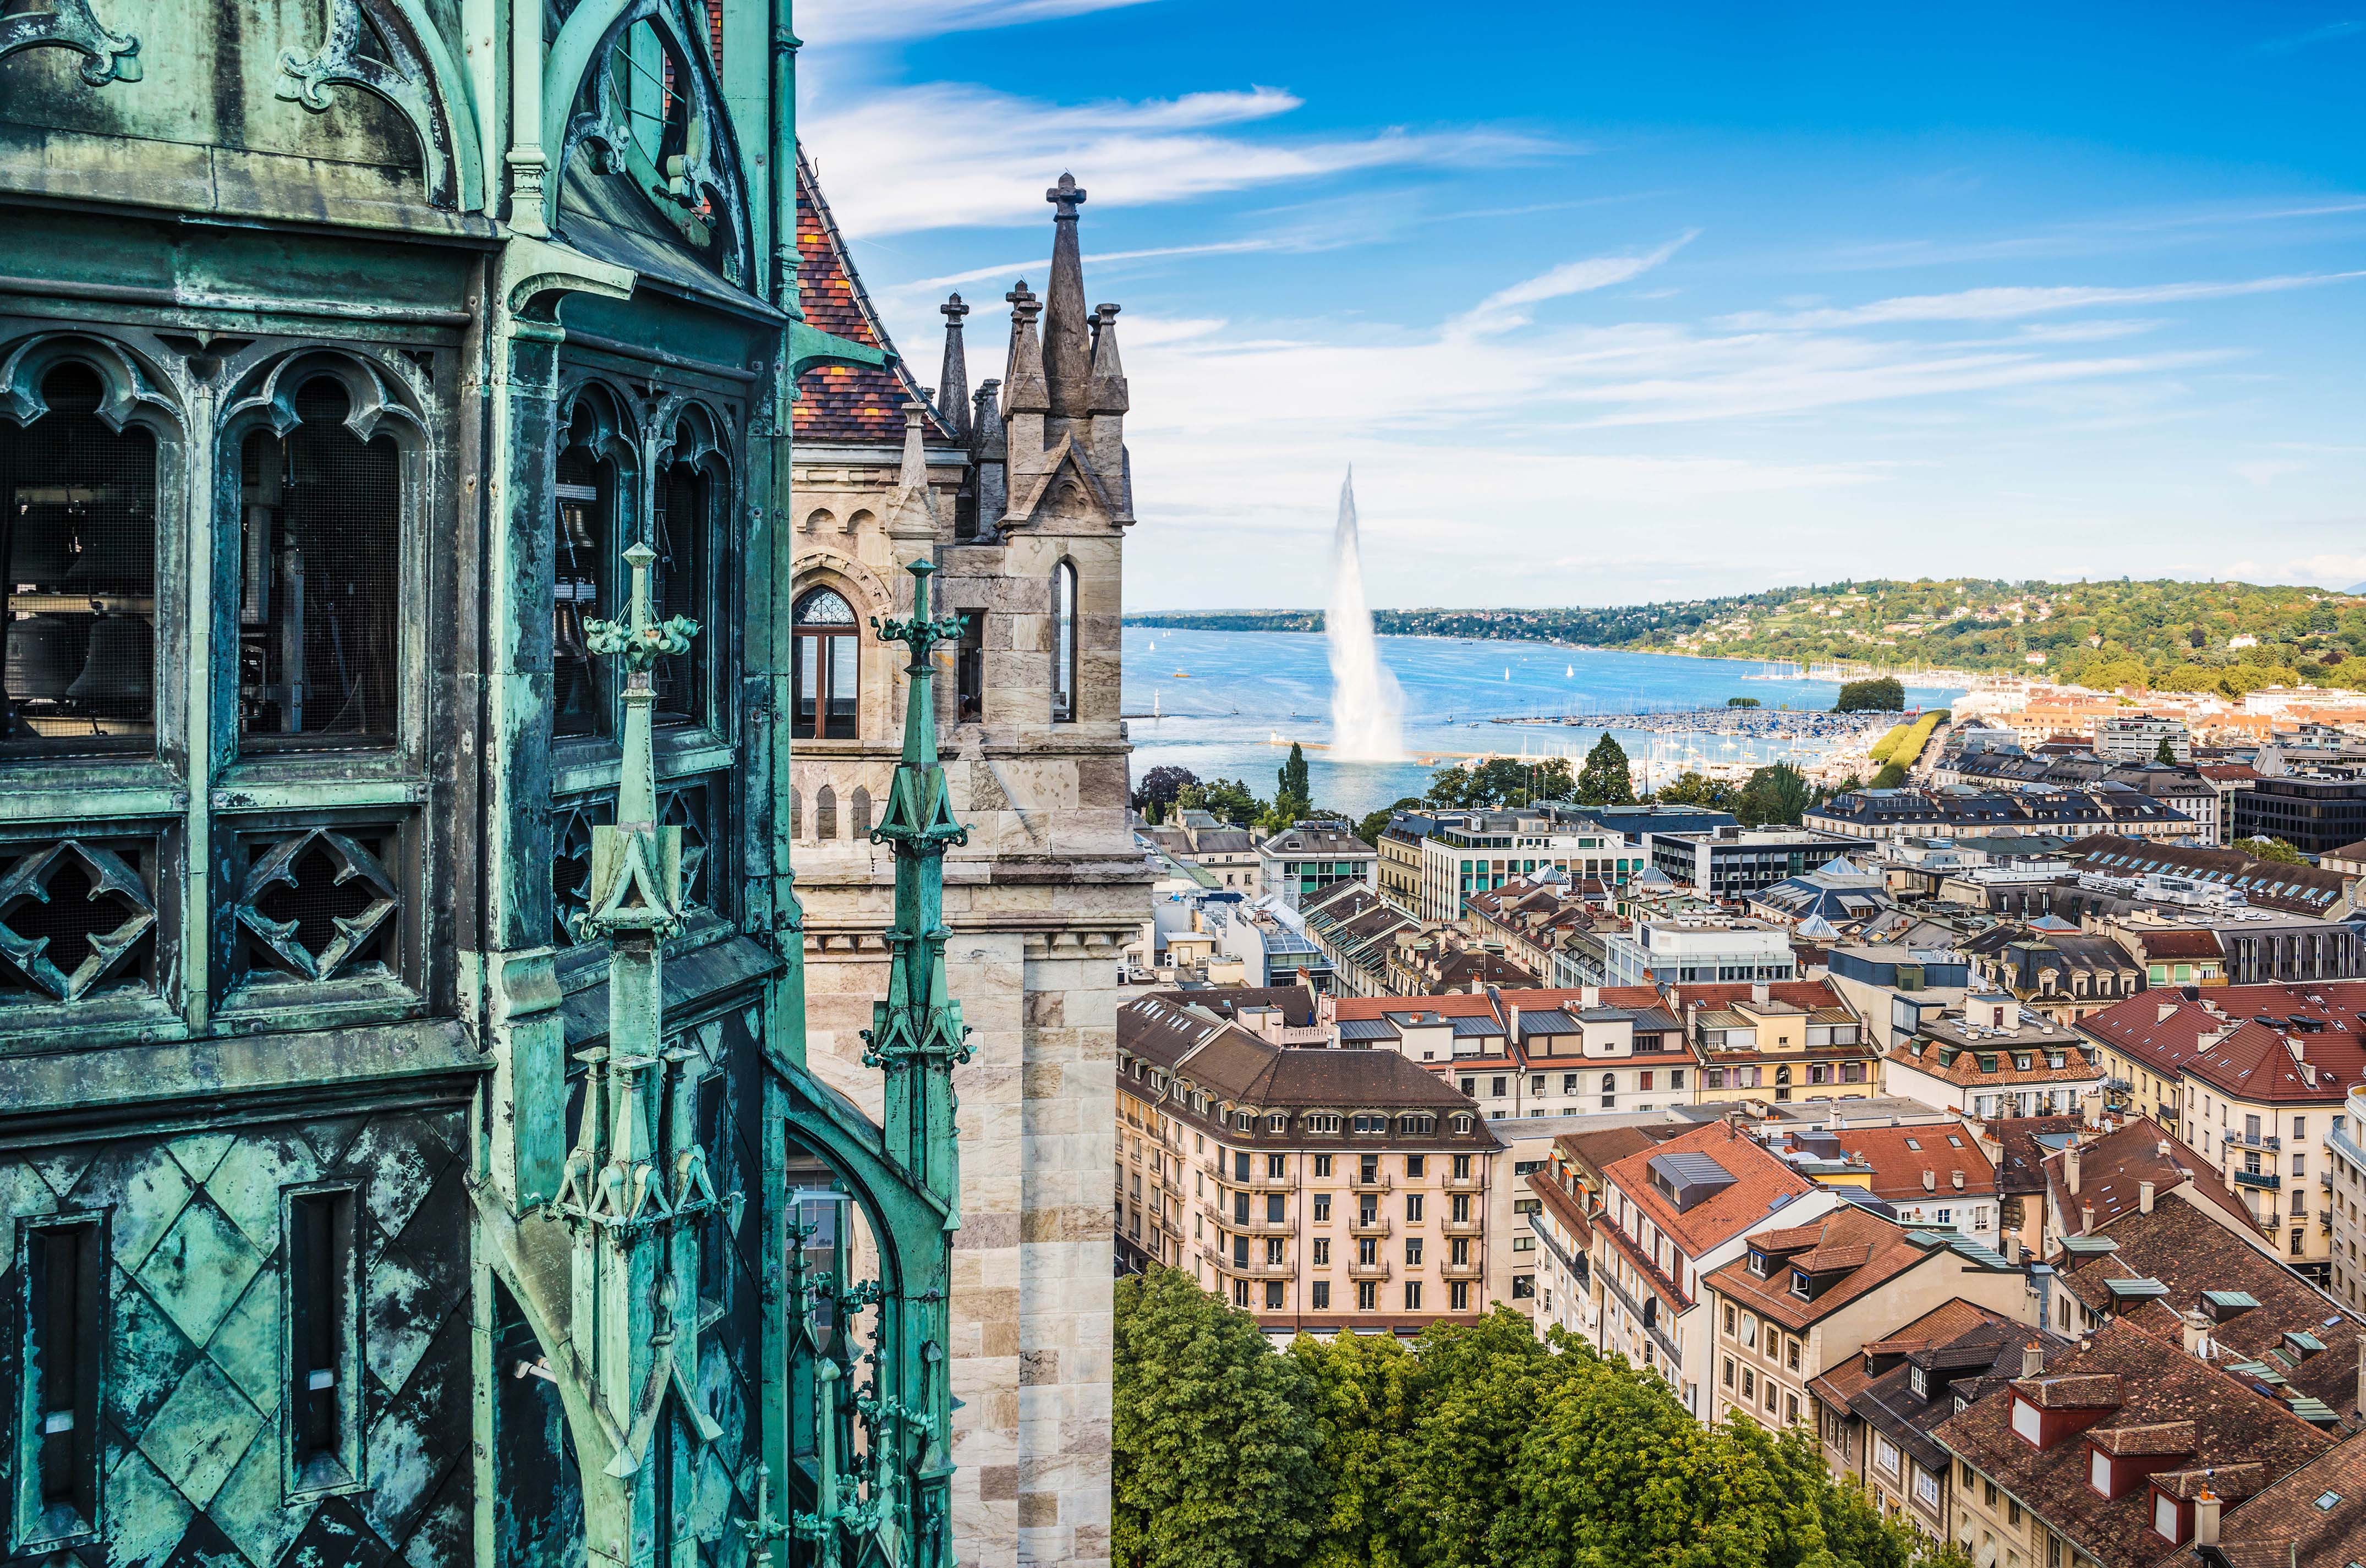 view-of-geneva-from-the-height-of-the-cathedral-of-saint-pierre-switzerland-shutterstock_214955713-2.jpg